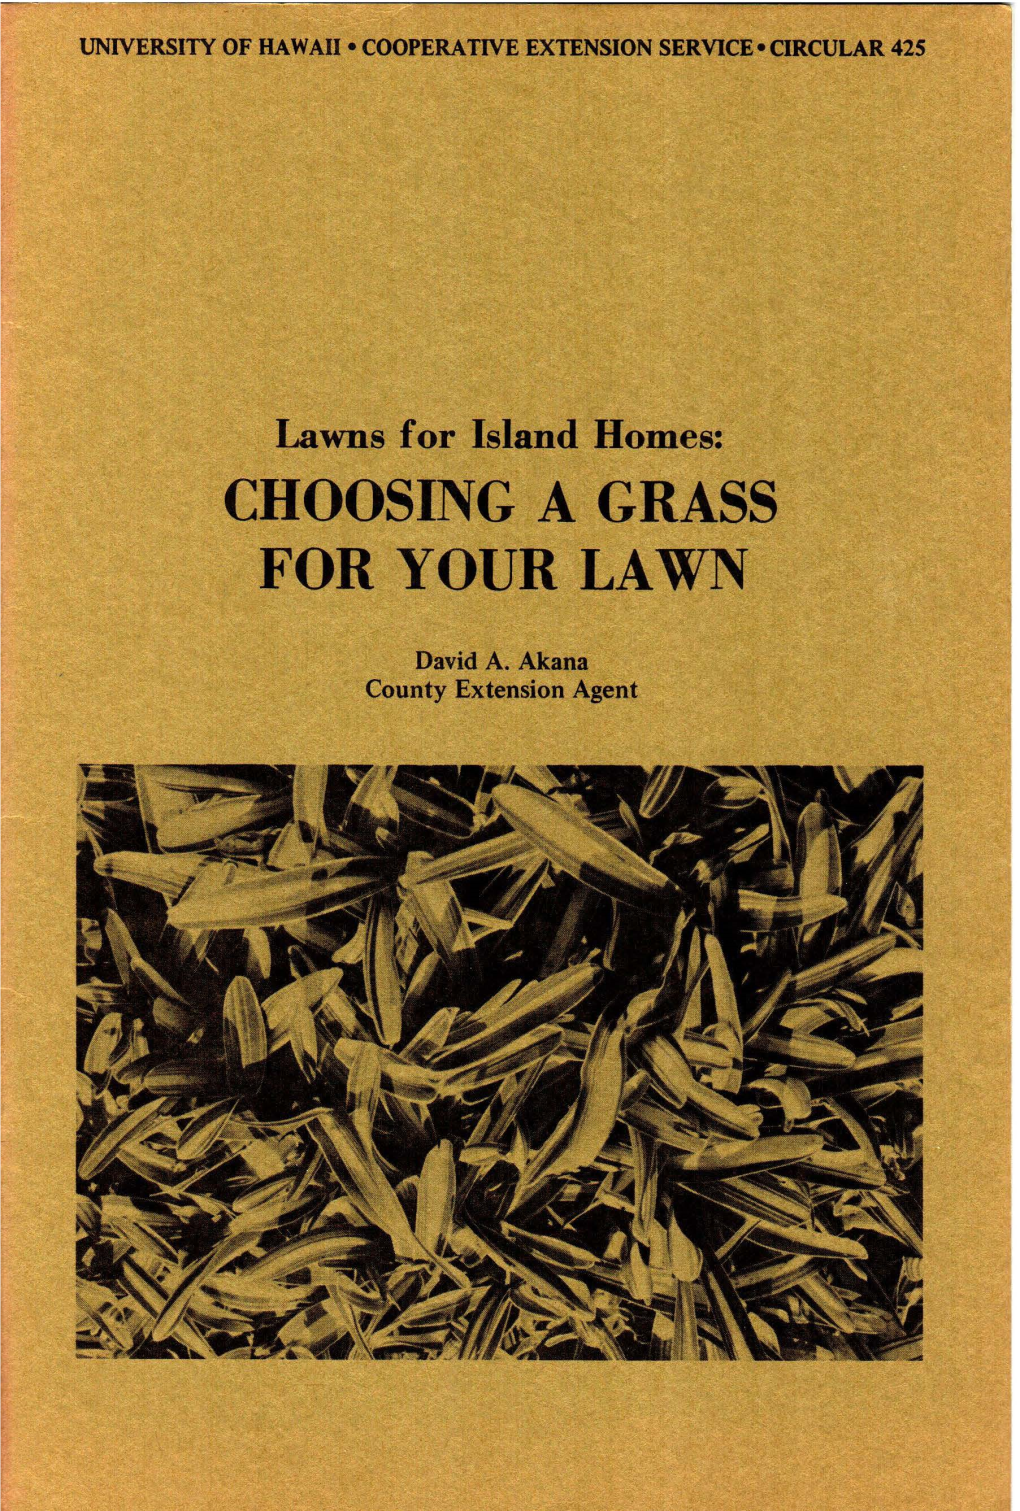 Lawns for Island Homes: CHOOSING a GRASS for YOUR LAWN